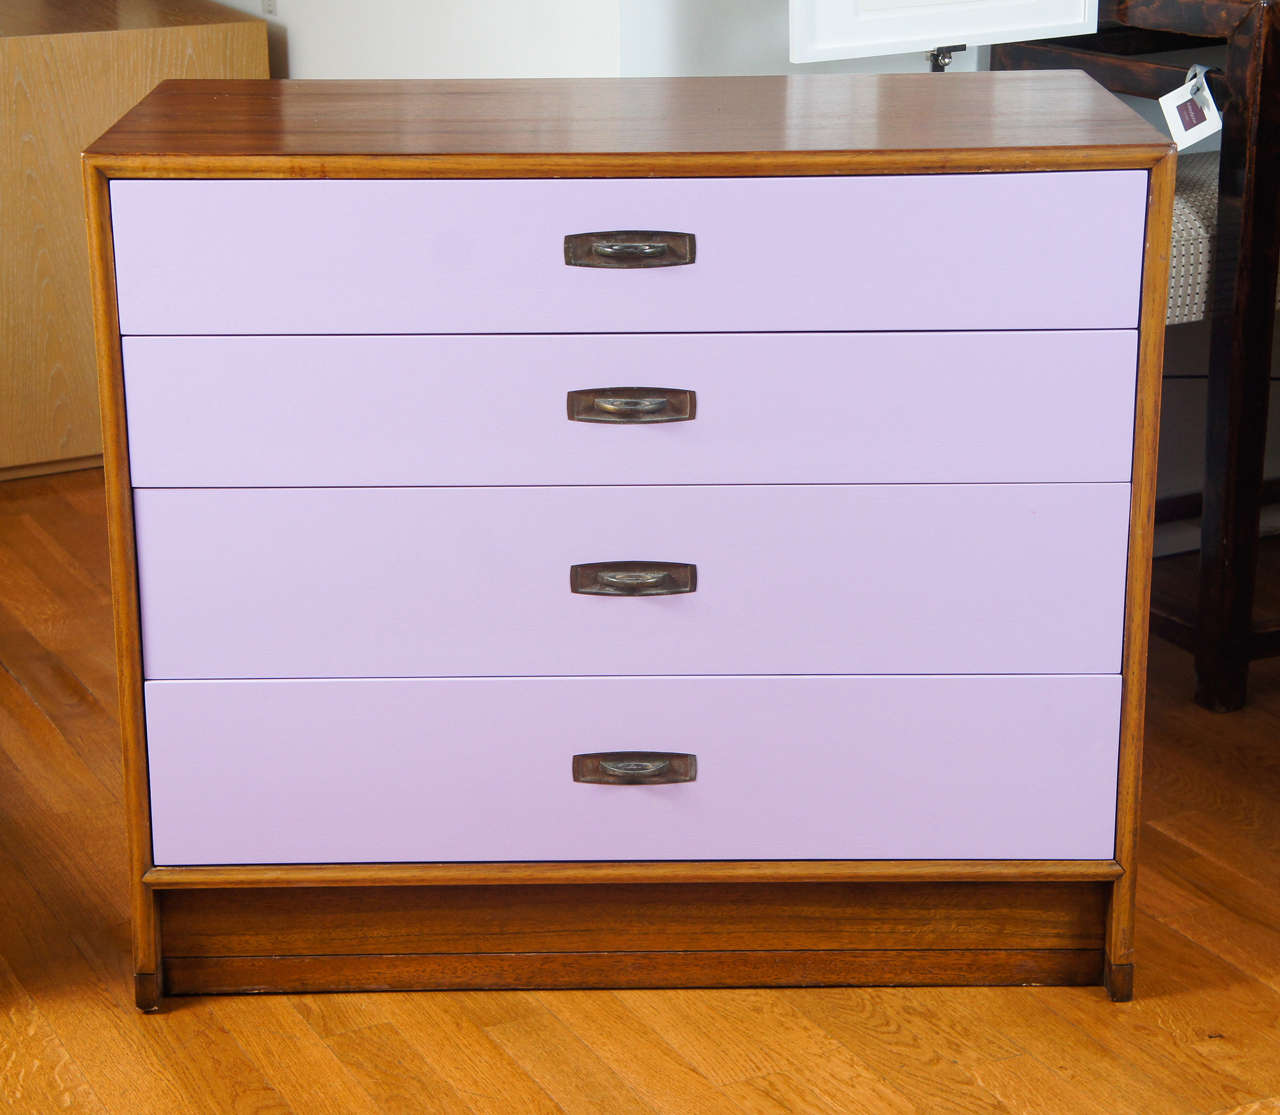 Midcentury four-drawer dresser with unique bronze drawer pulls.
Newly lacquered drawer fronts in a lovely shade of lilac.
Signed Drexel.